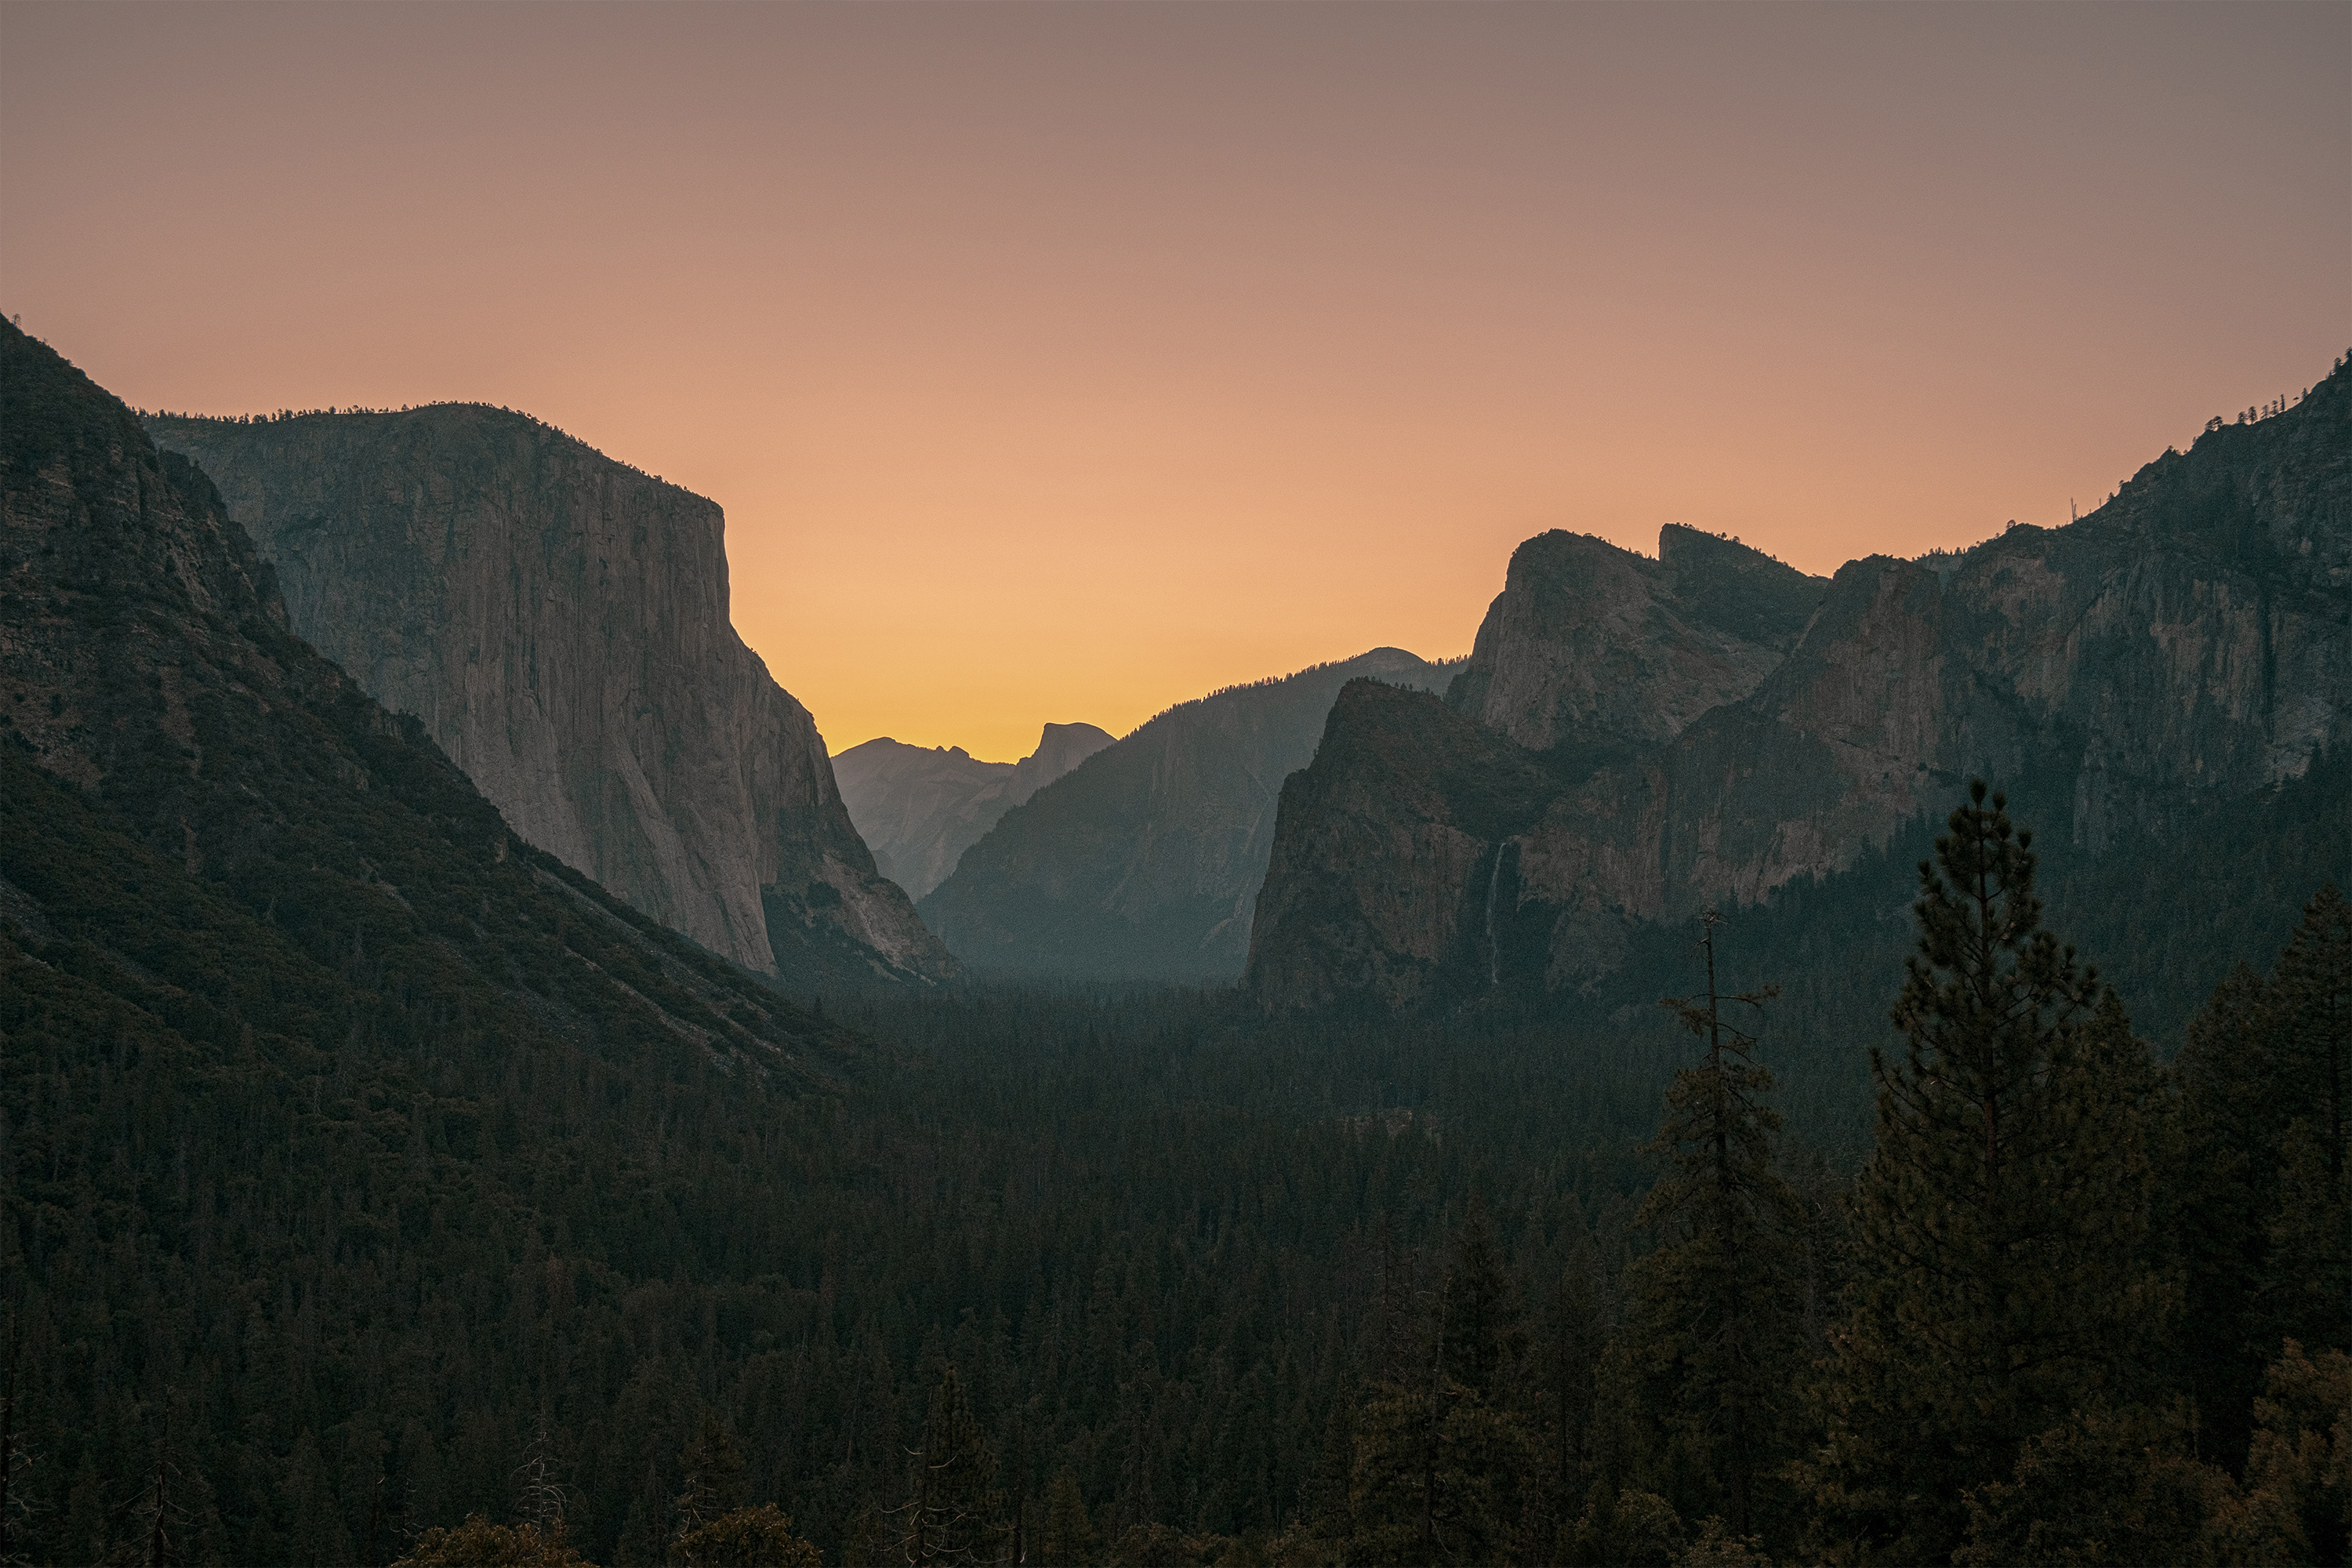 General 3000x2000 Yosemite National Park USA forest trees nature landscape sunset glow mountains